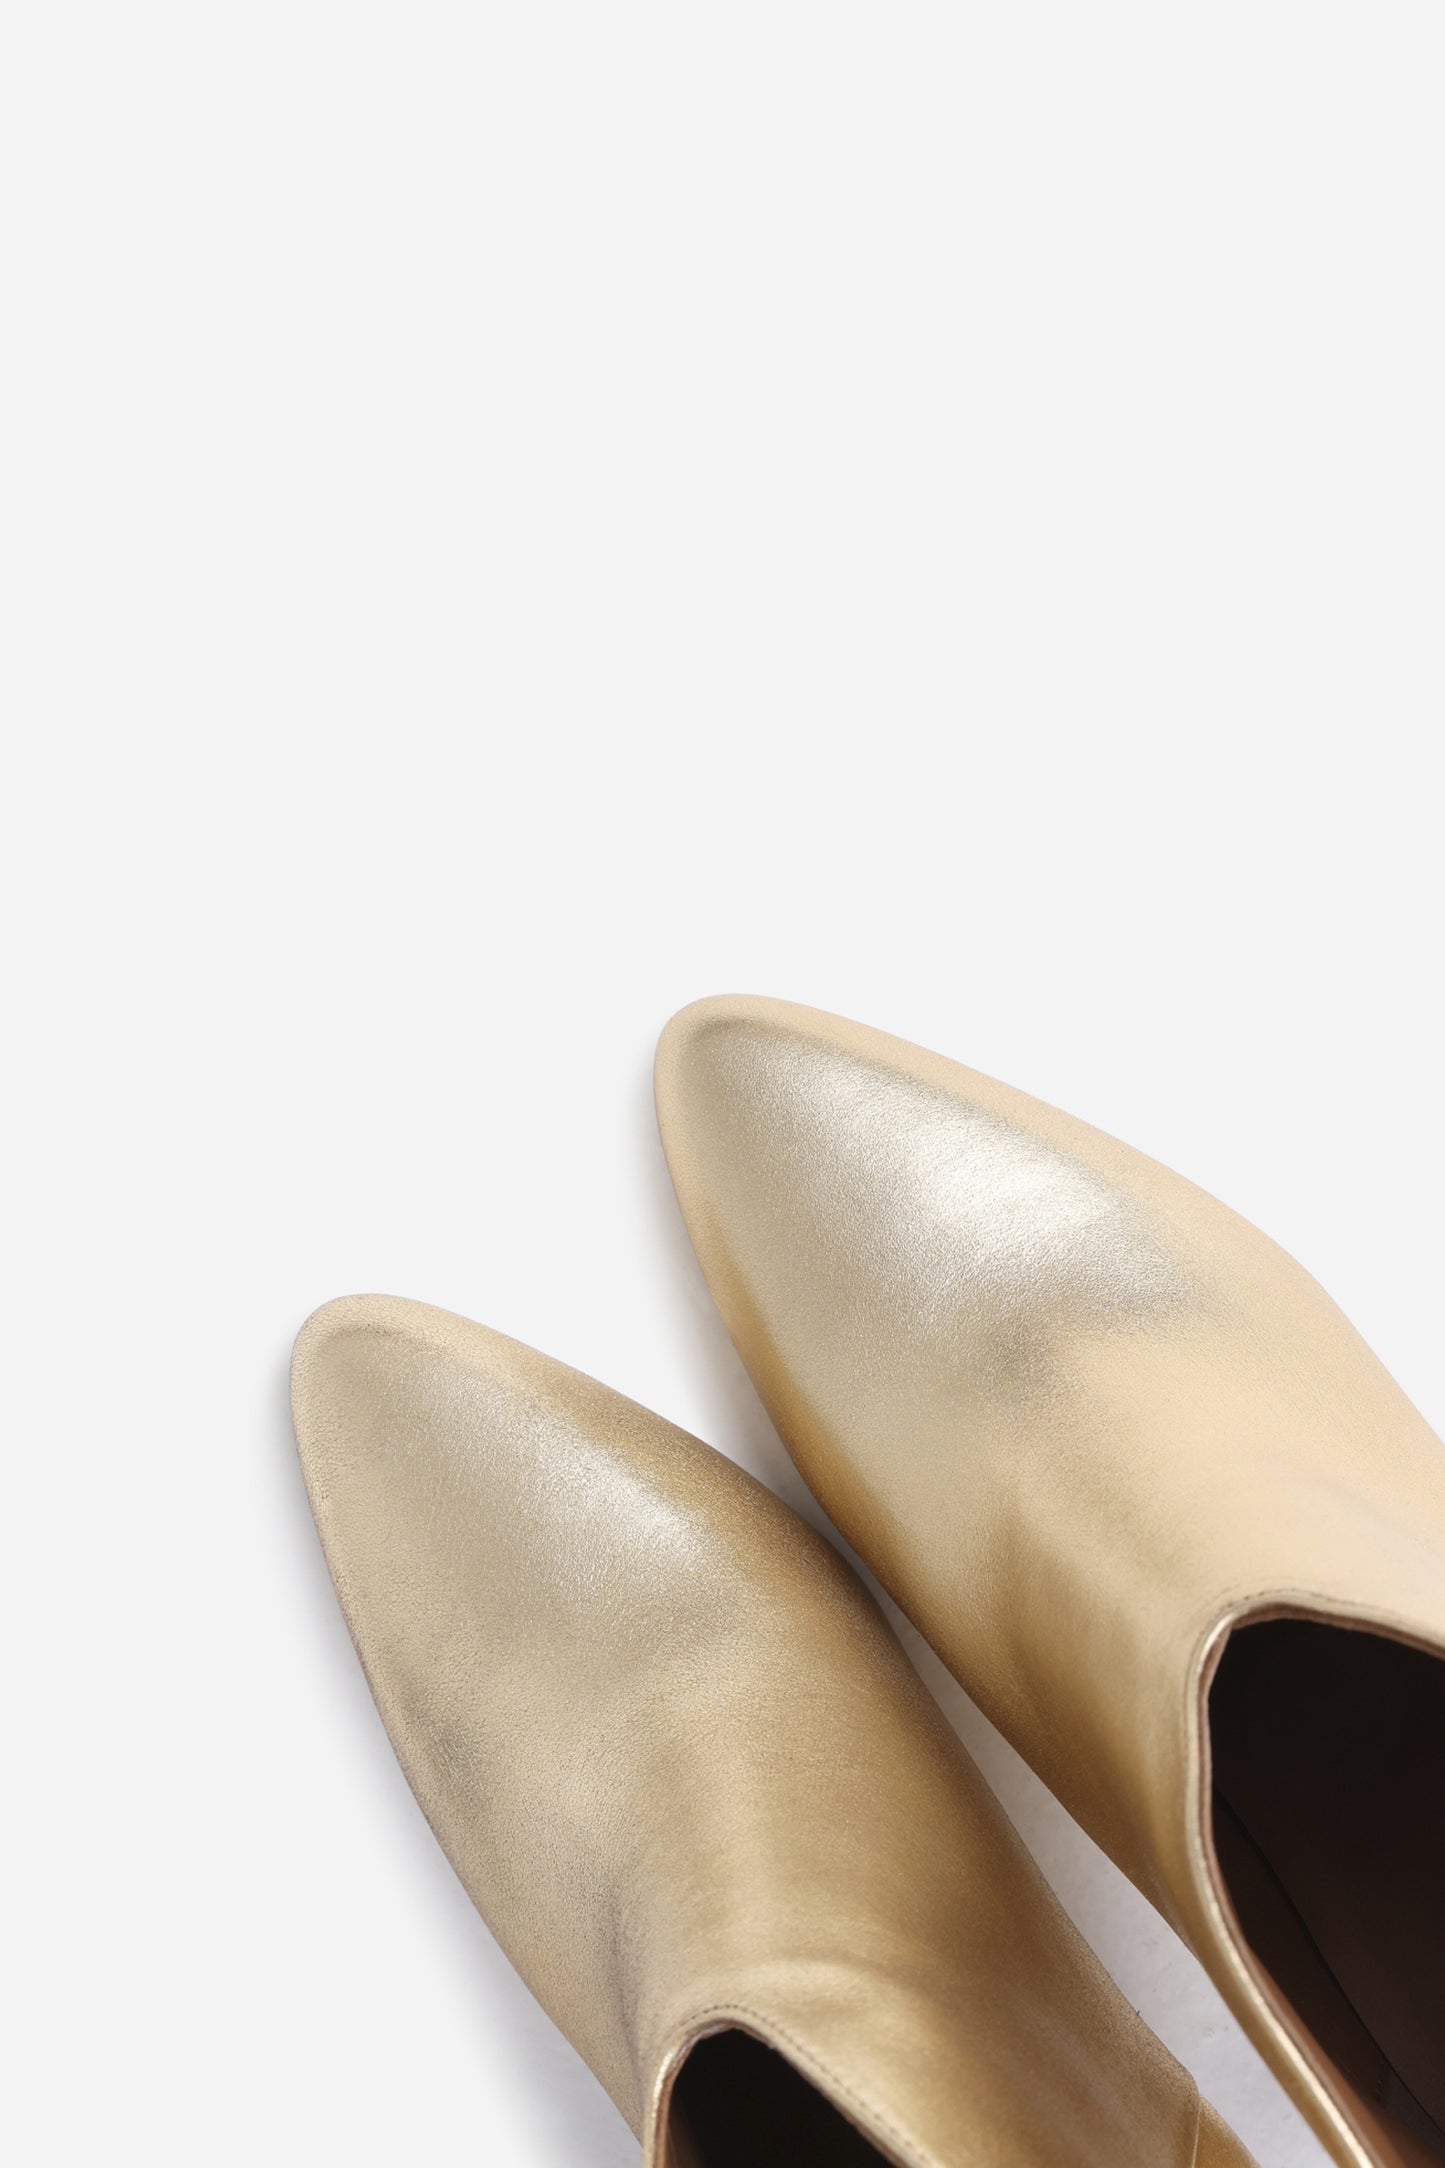 Stiefelette Leiy-ah | gold